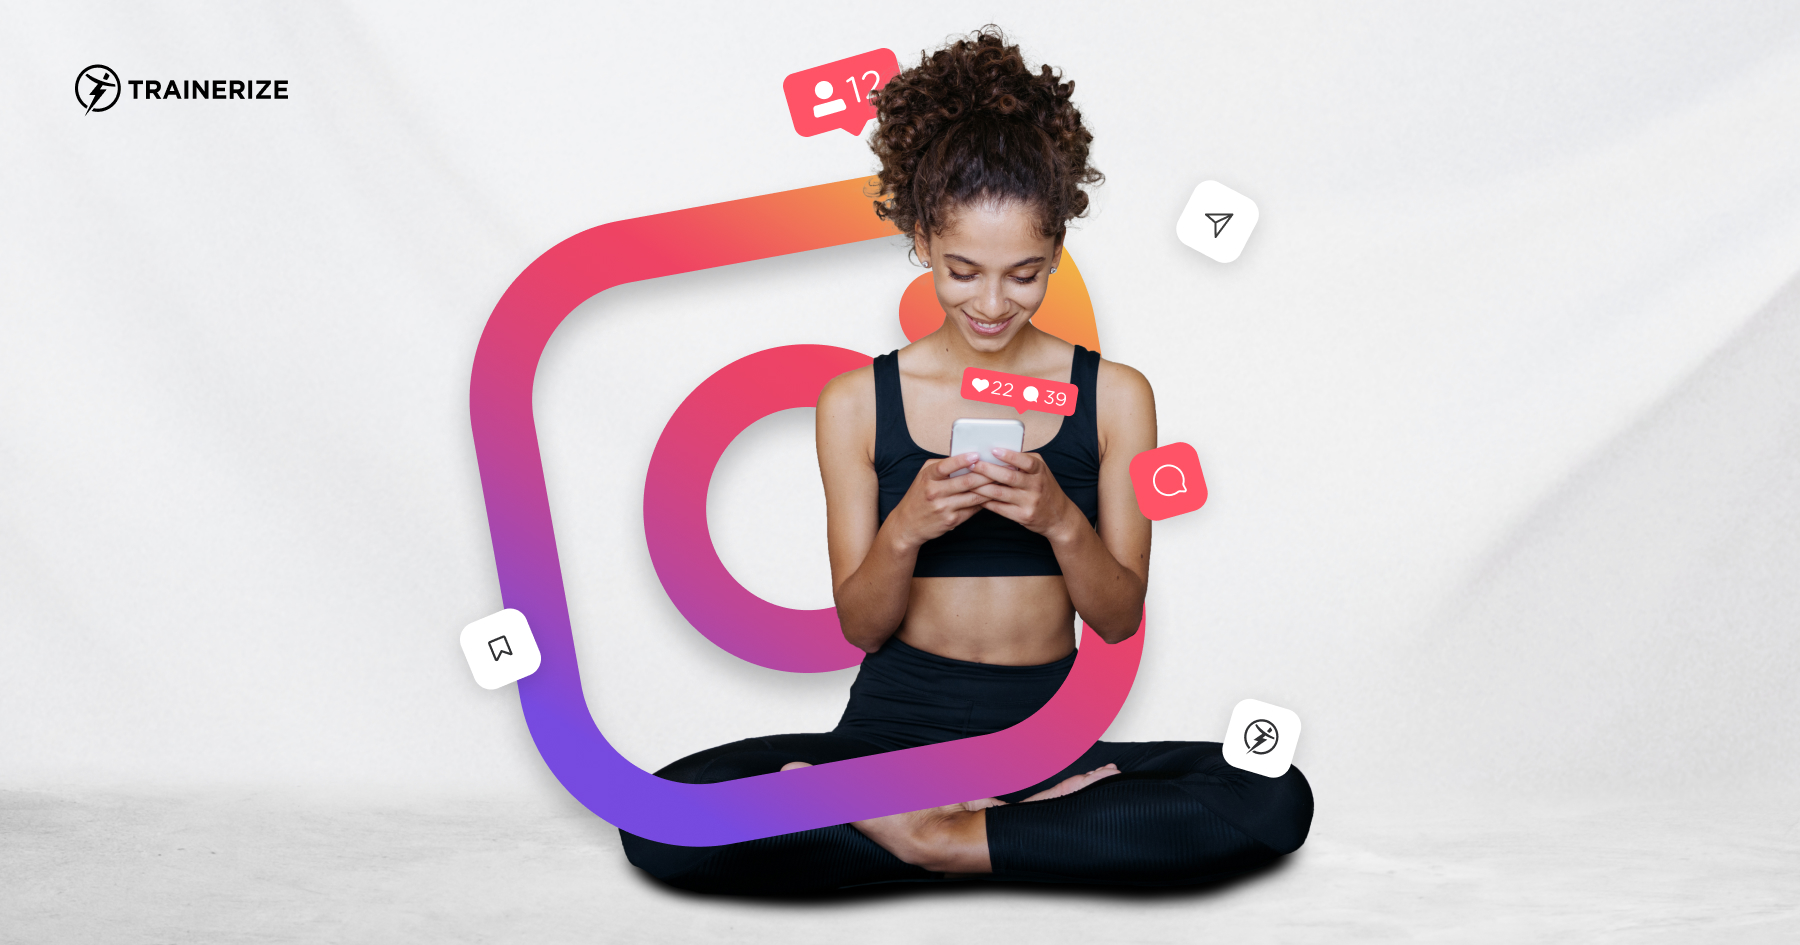 How to Share Full Reels on Instagram Story: The Ultimate Guide